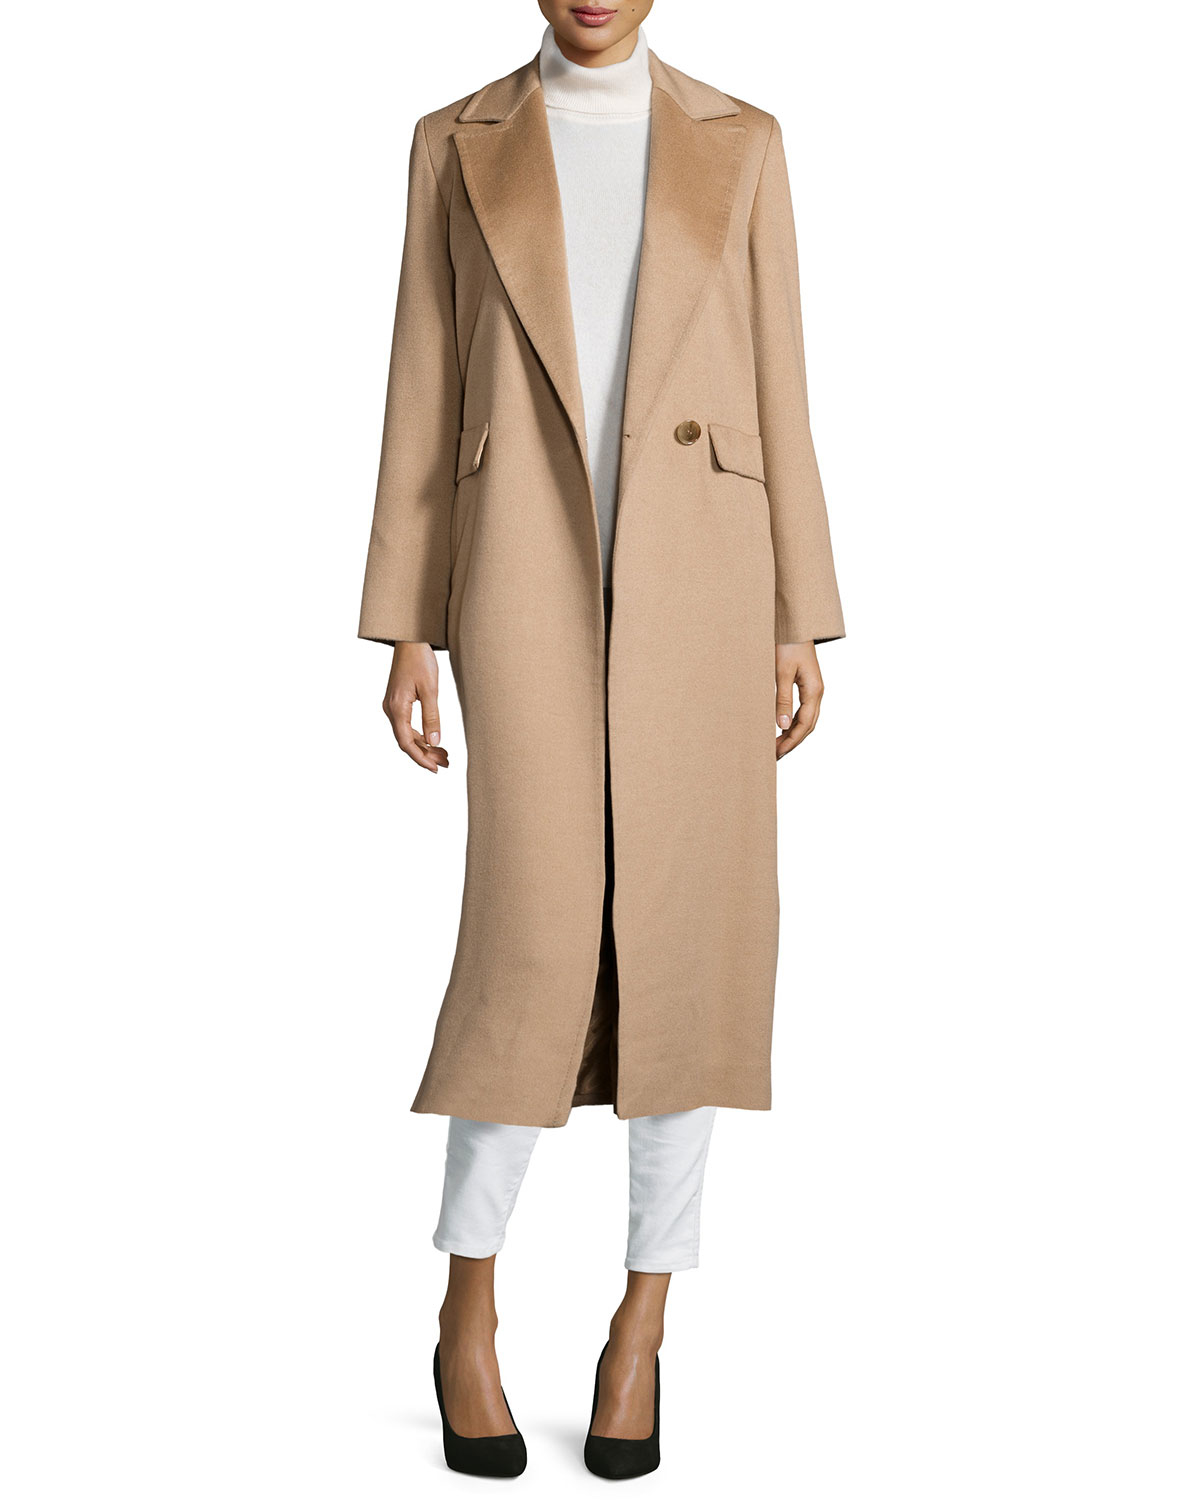 Sofia cashmere Long Wrap Camel-hair Coat in Natural | Lyst